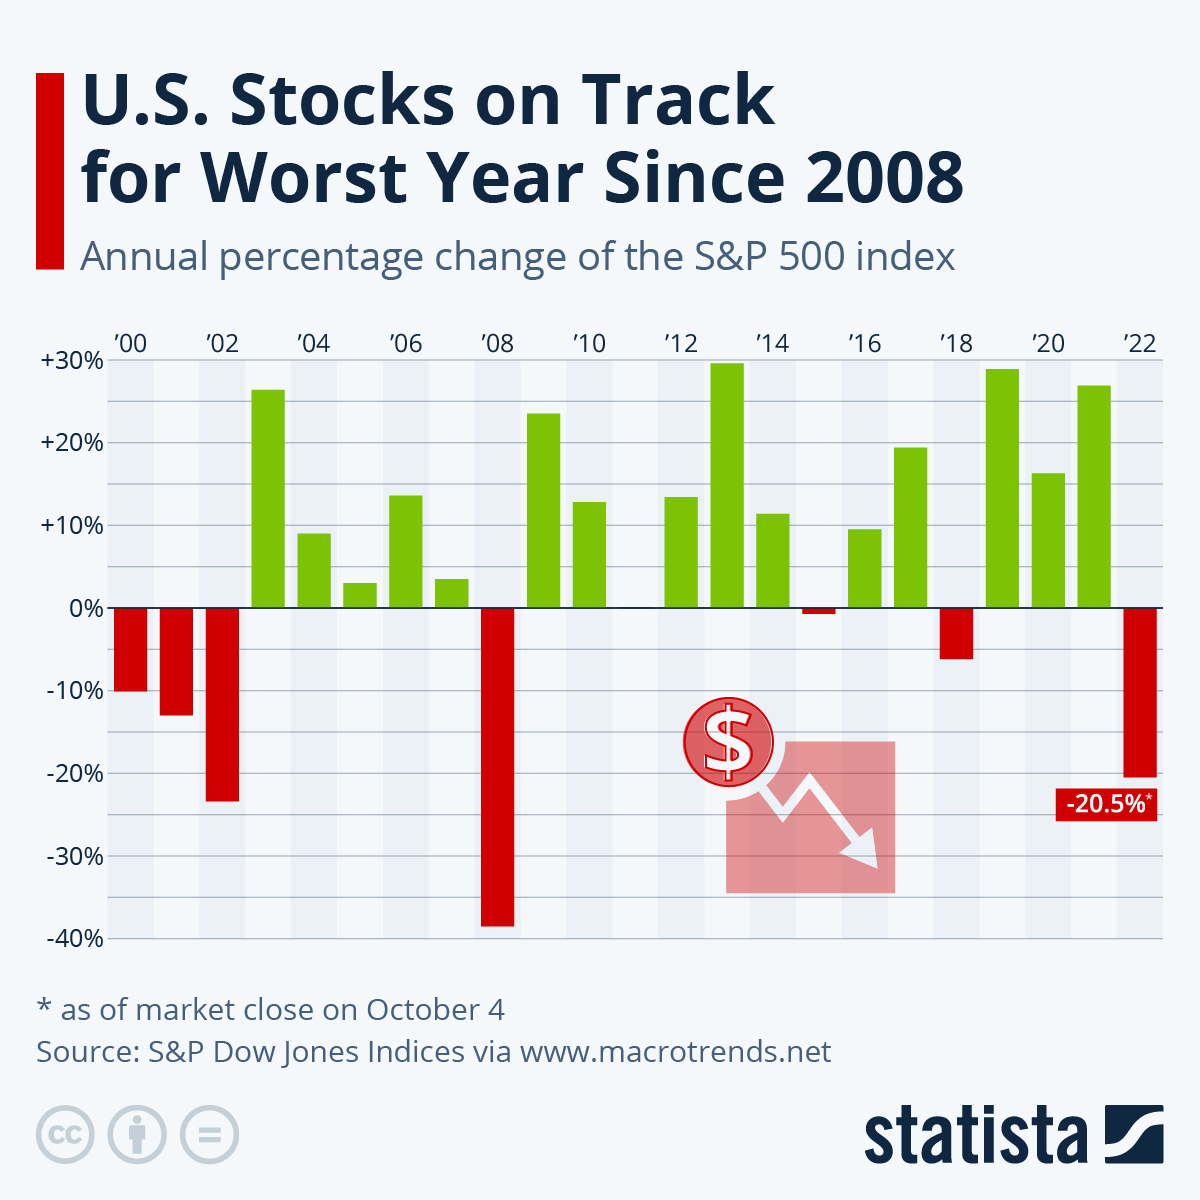 U.S. Stocks on Track for Worst Year Since 2008